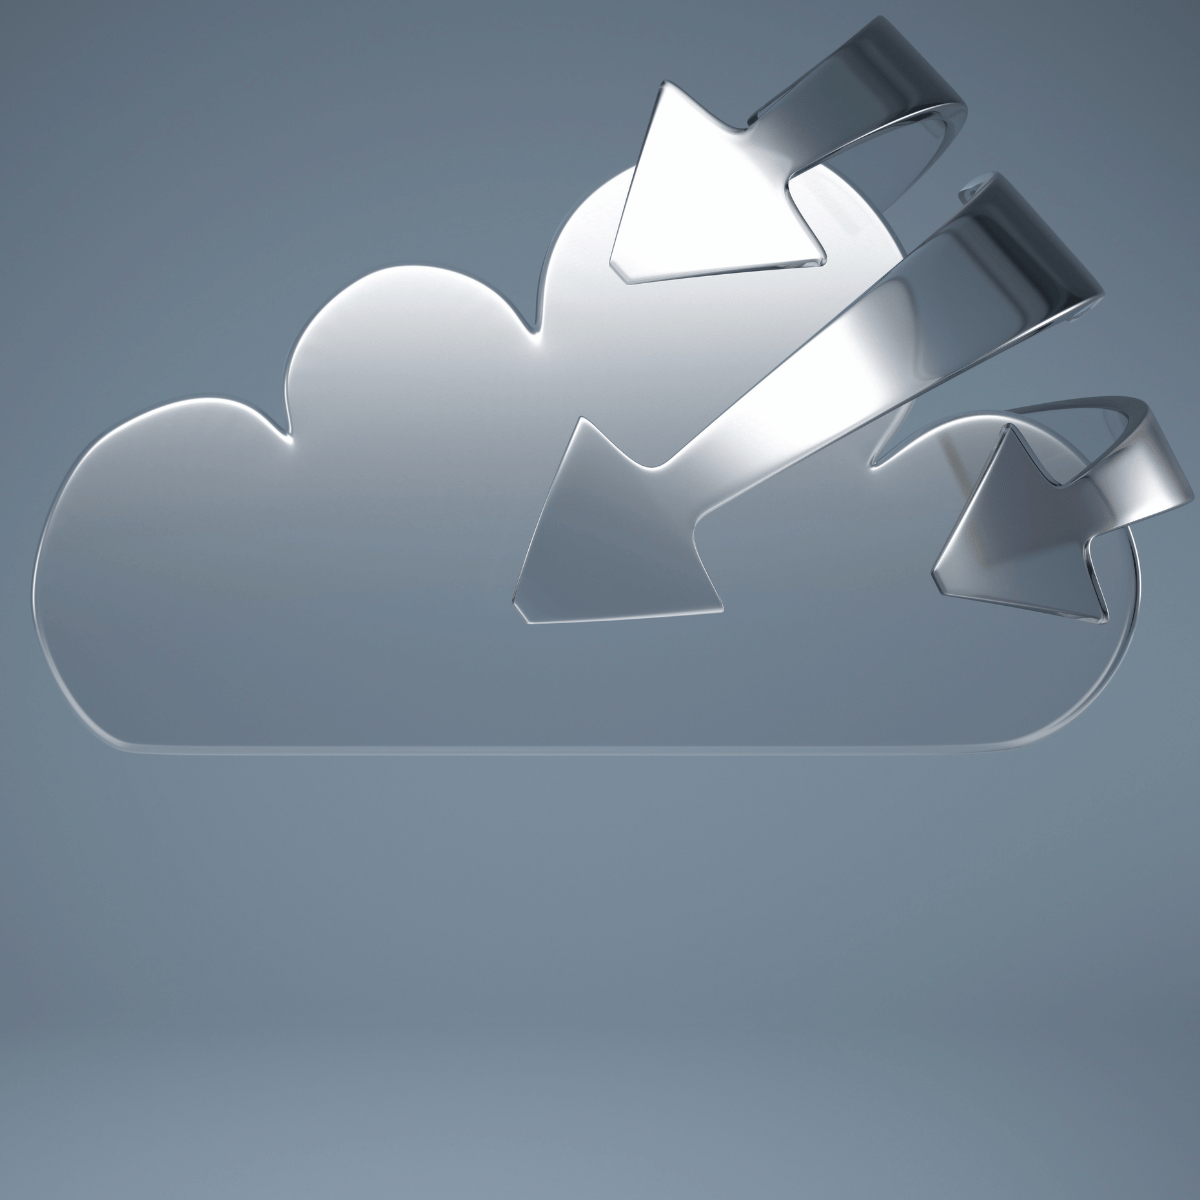 Ofcom Now Investigate Competition In Cloud Services